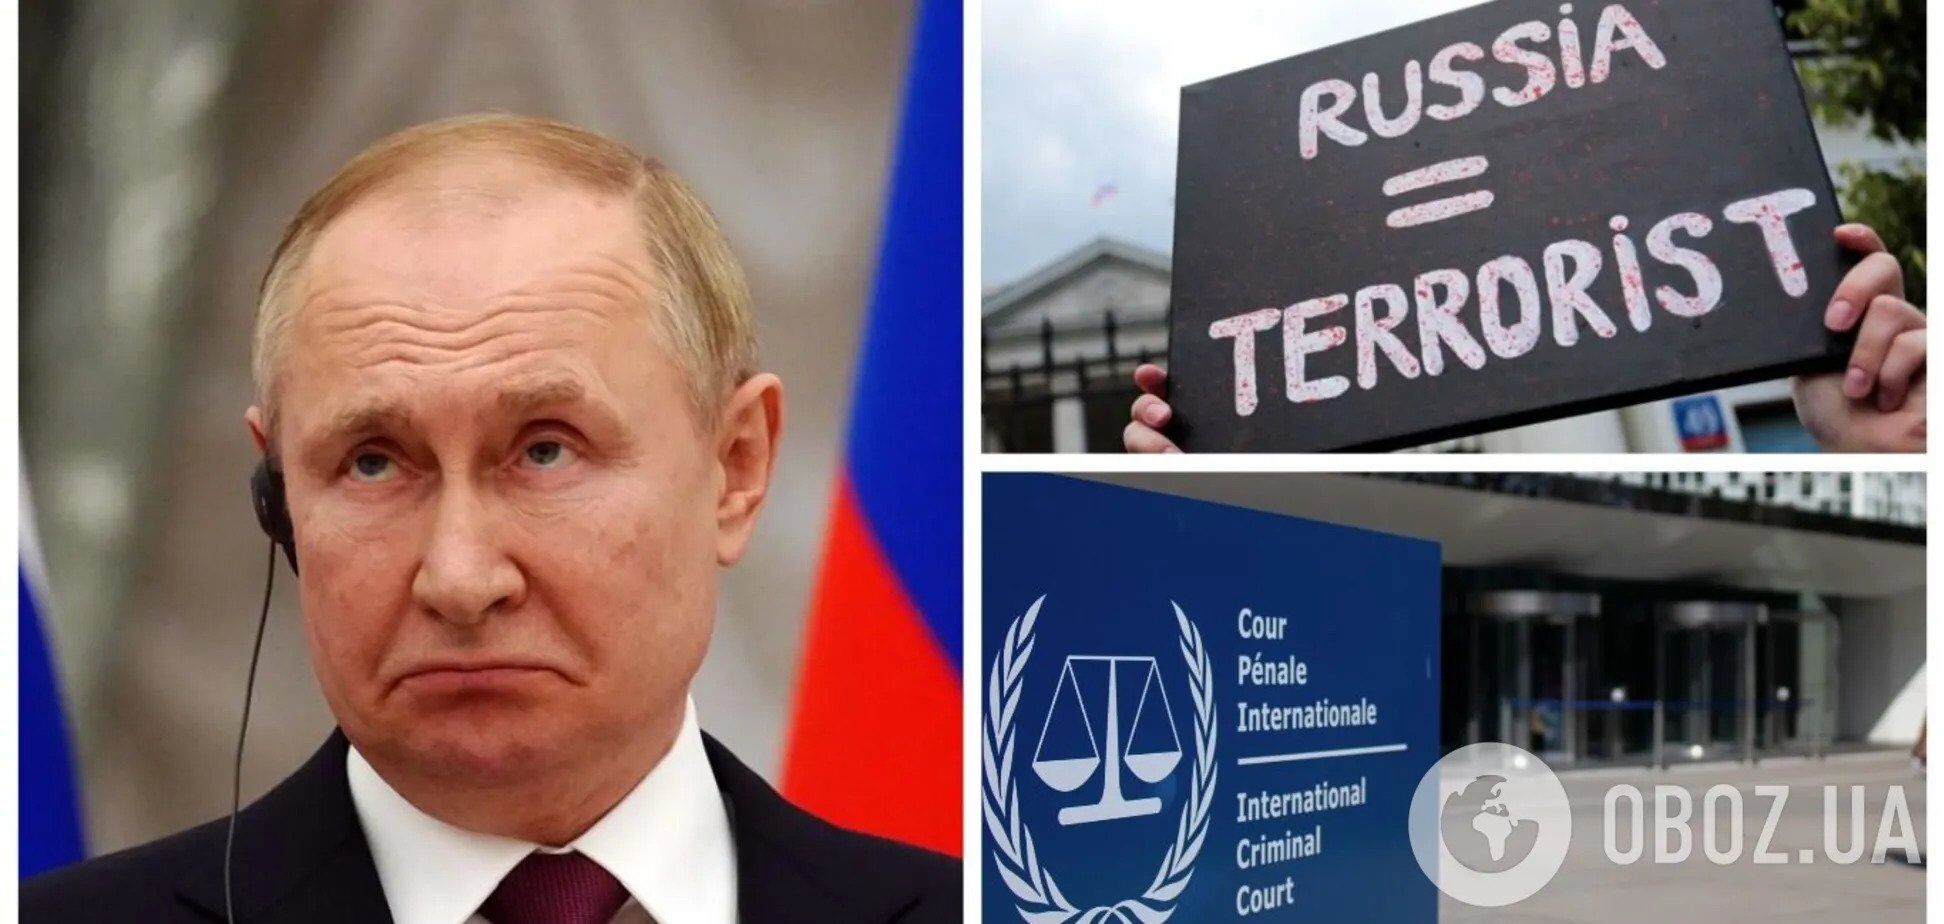 Victims number in the tens of thousands: the main crimes of the Kremlin dictator Putin, which the world cannot forget